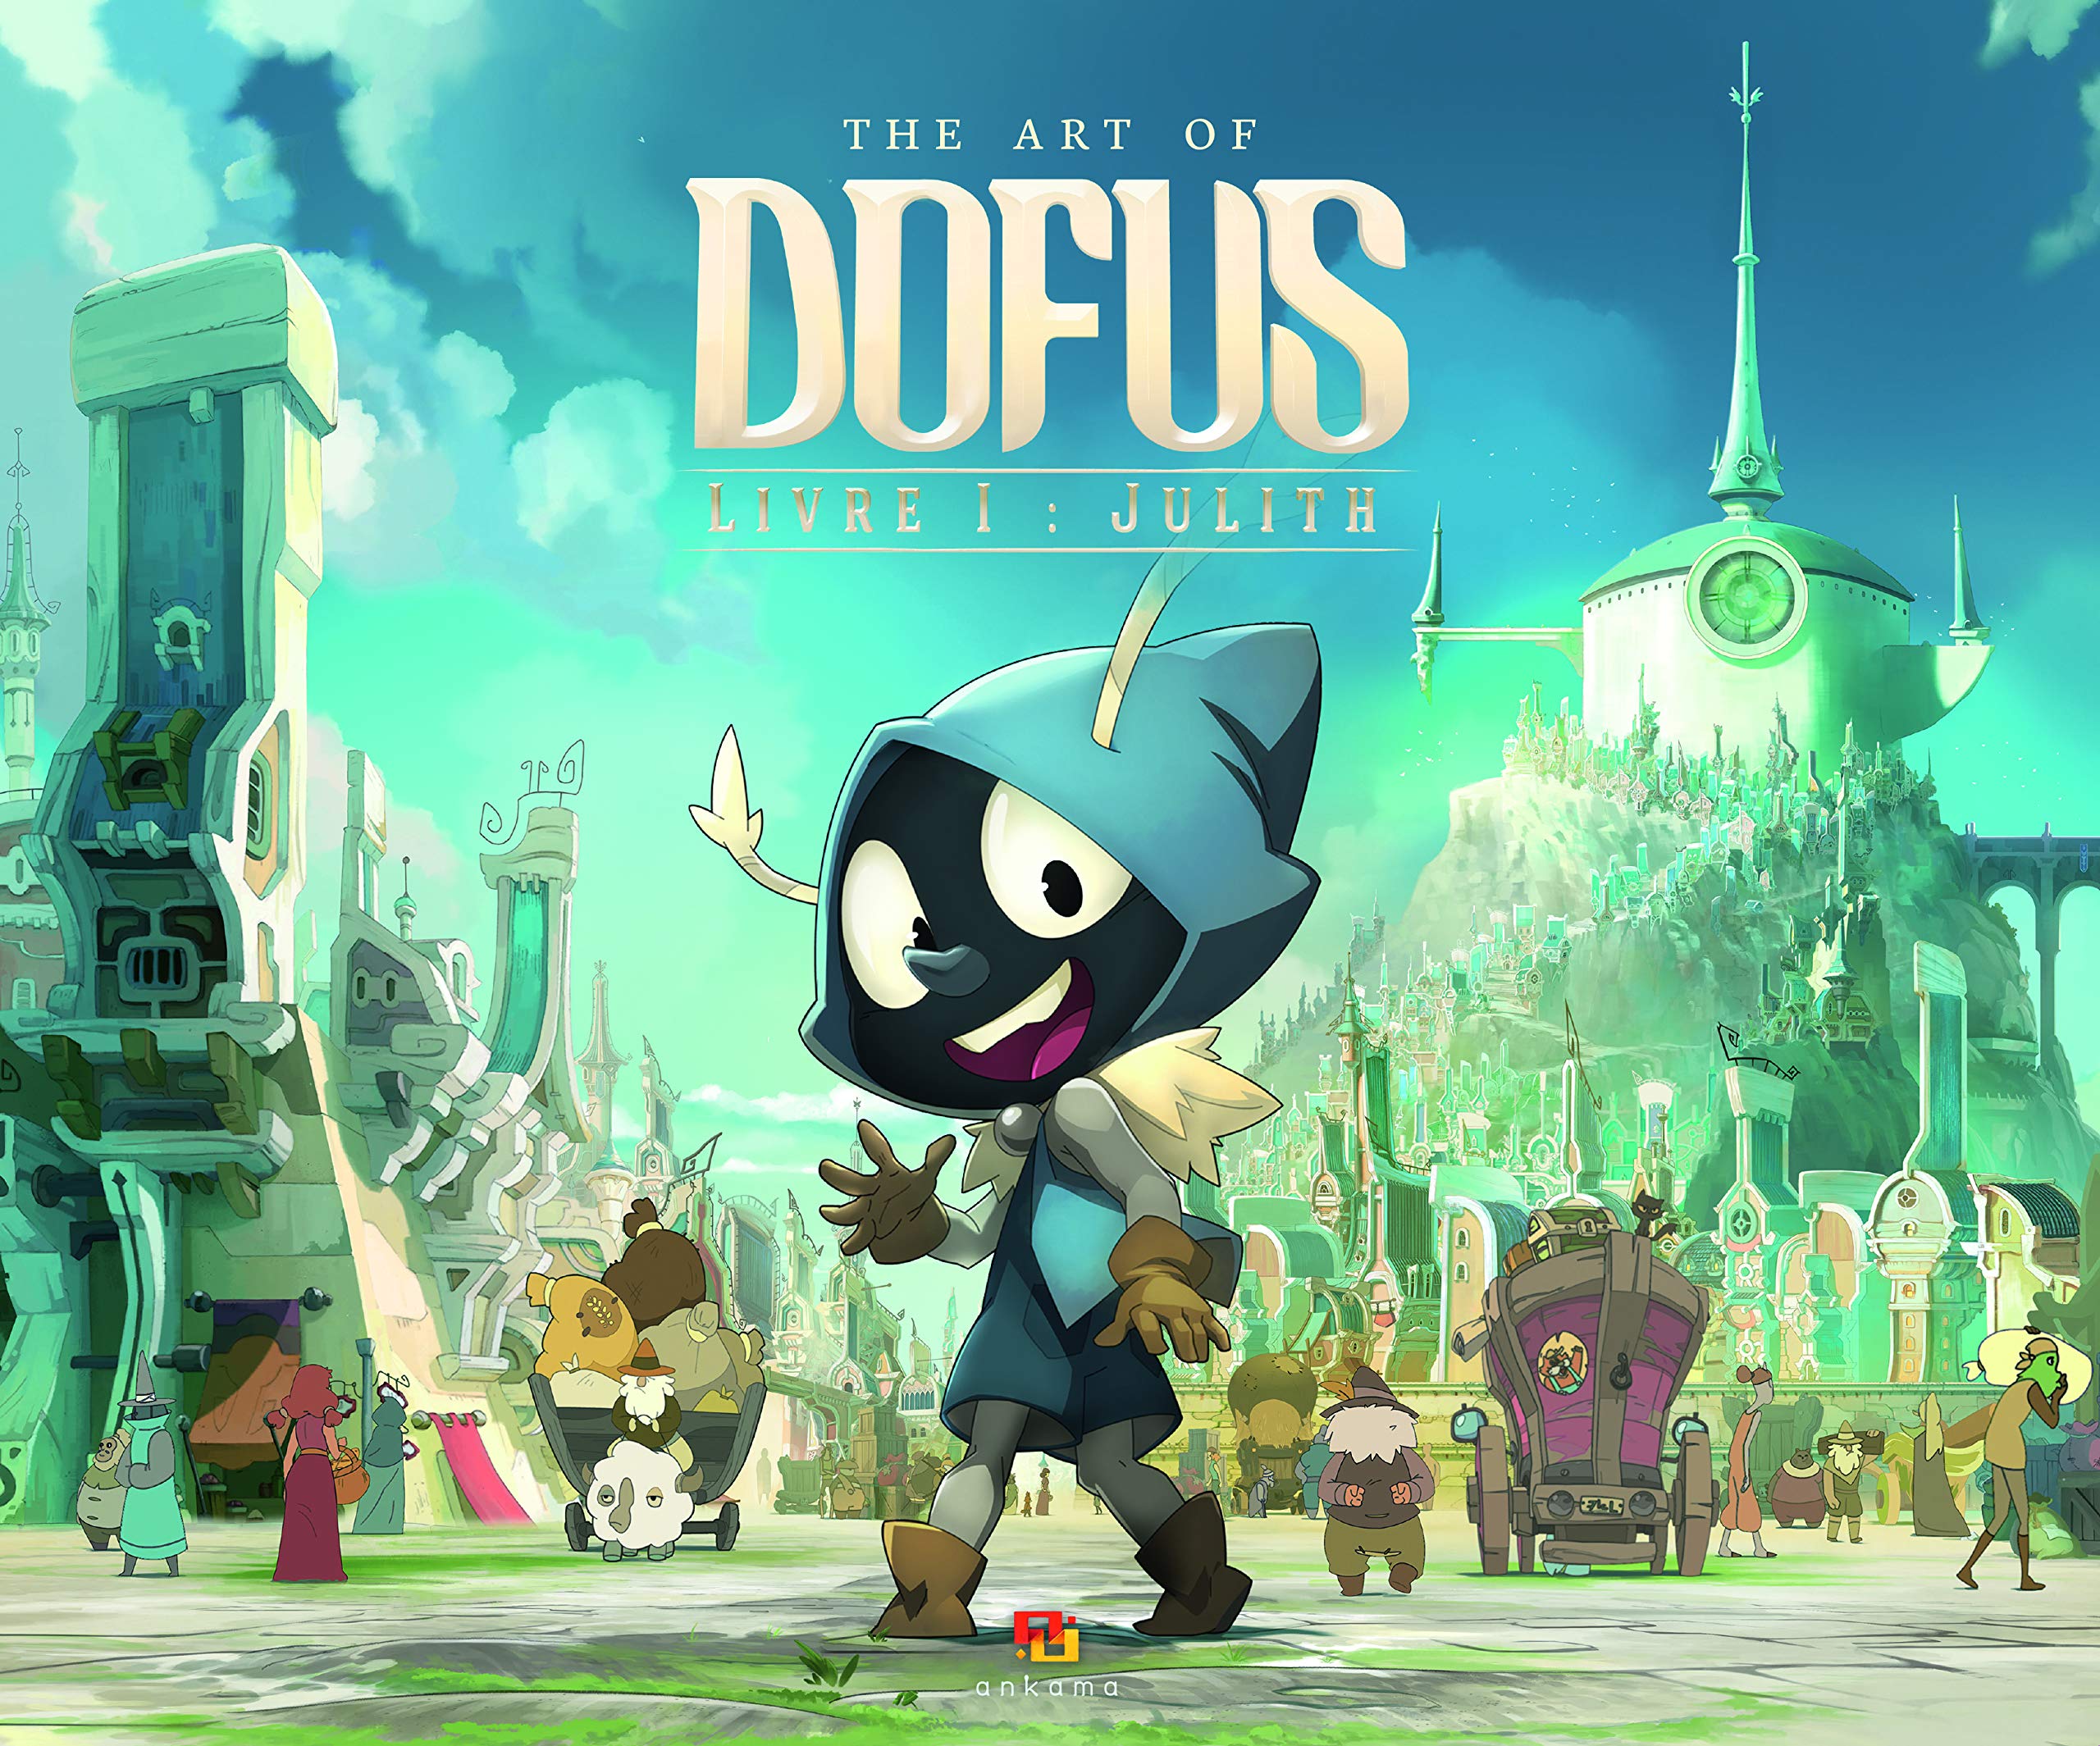 where to watch dofus book 1 julith